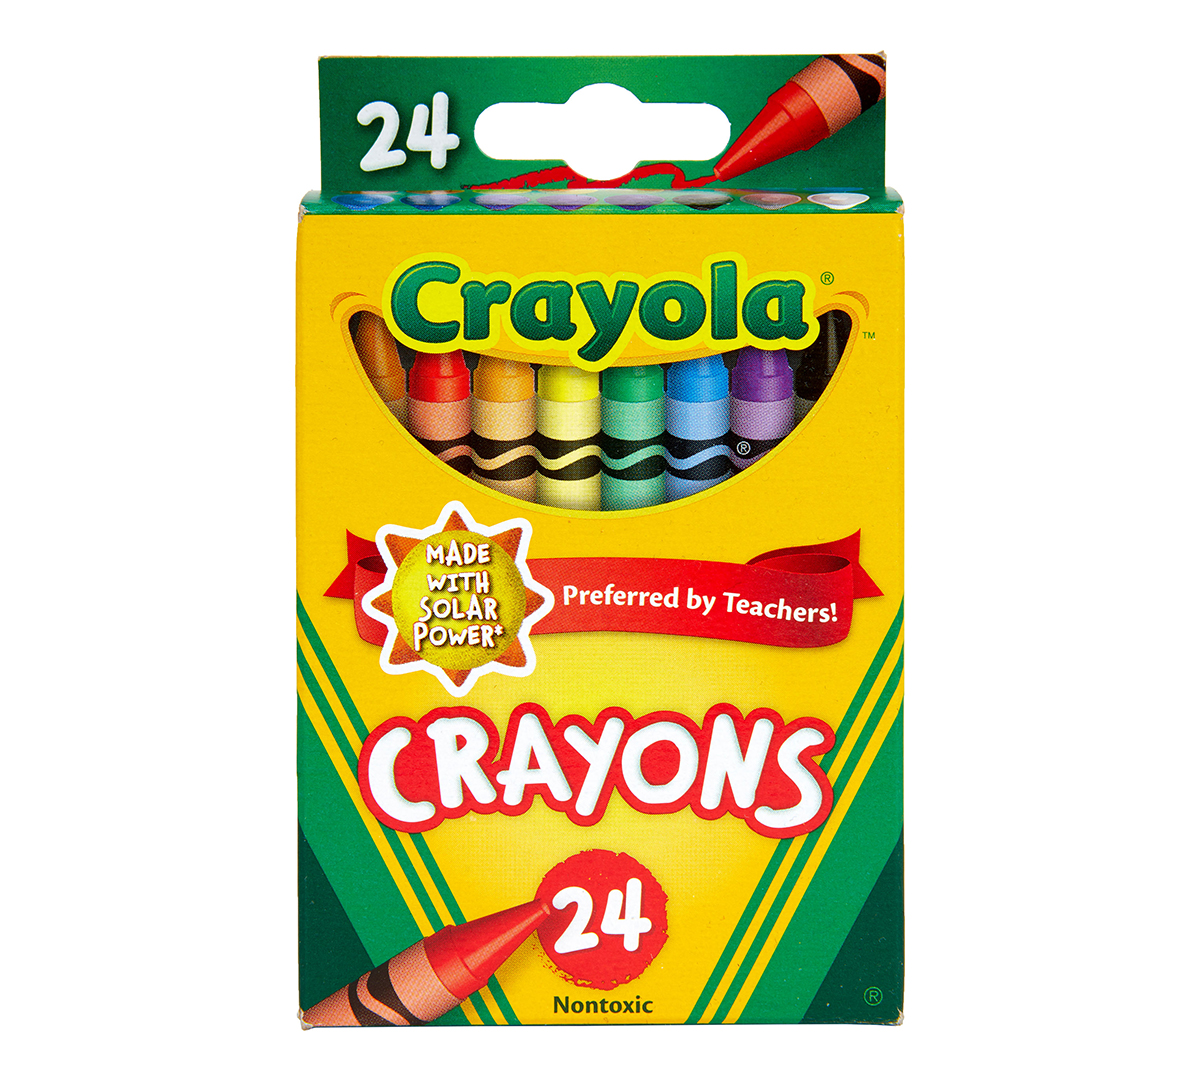 Crayola 24 Count Box of Crayons Non-Toxic Coloring School Supplies 3 Pack 